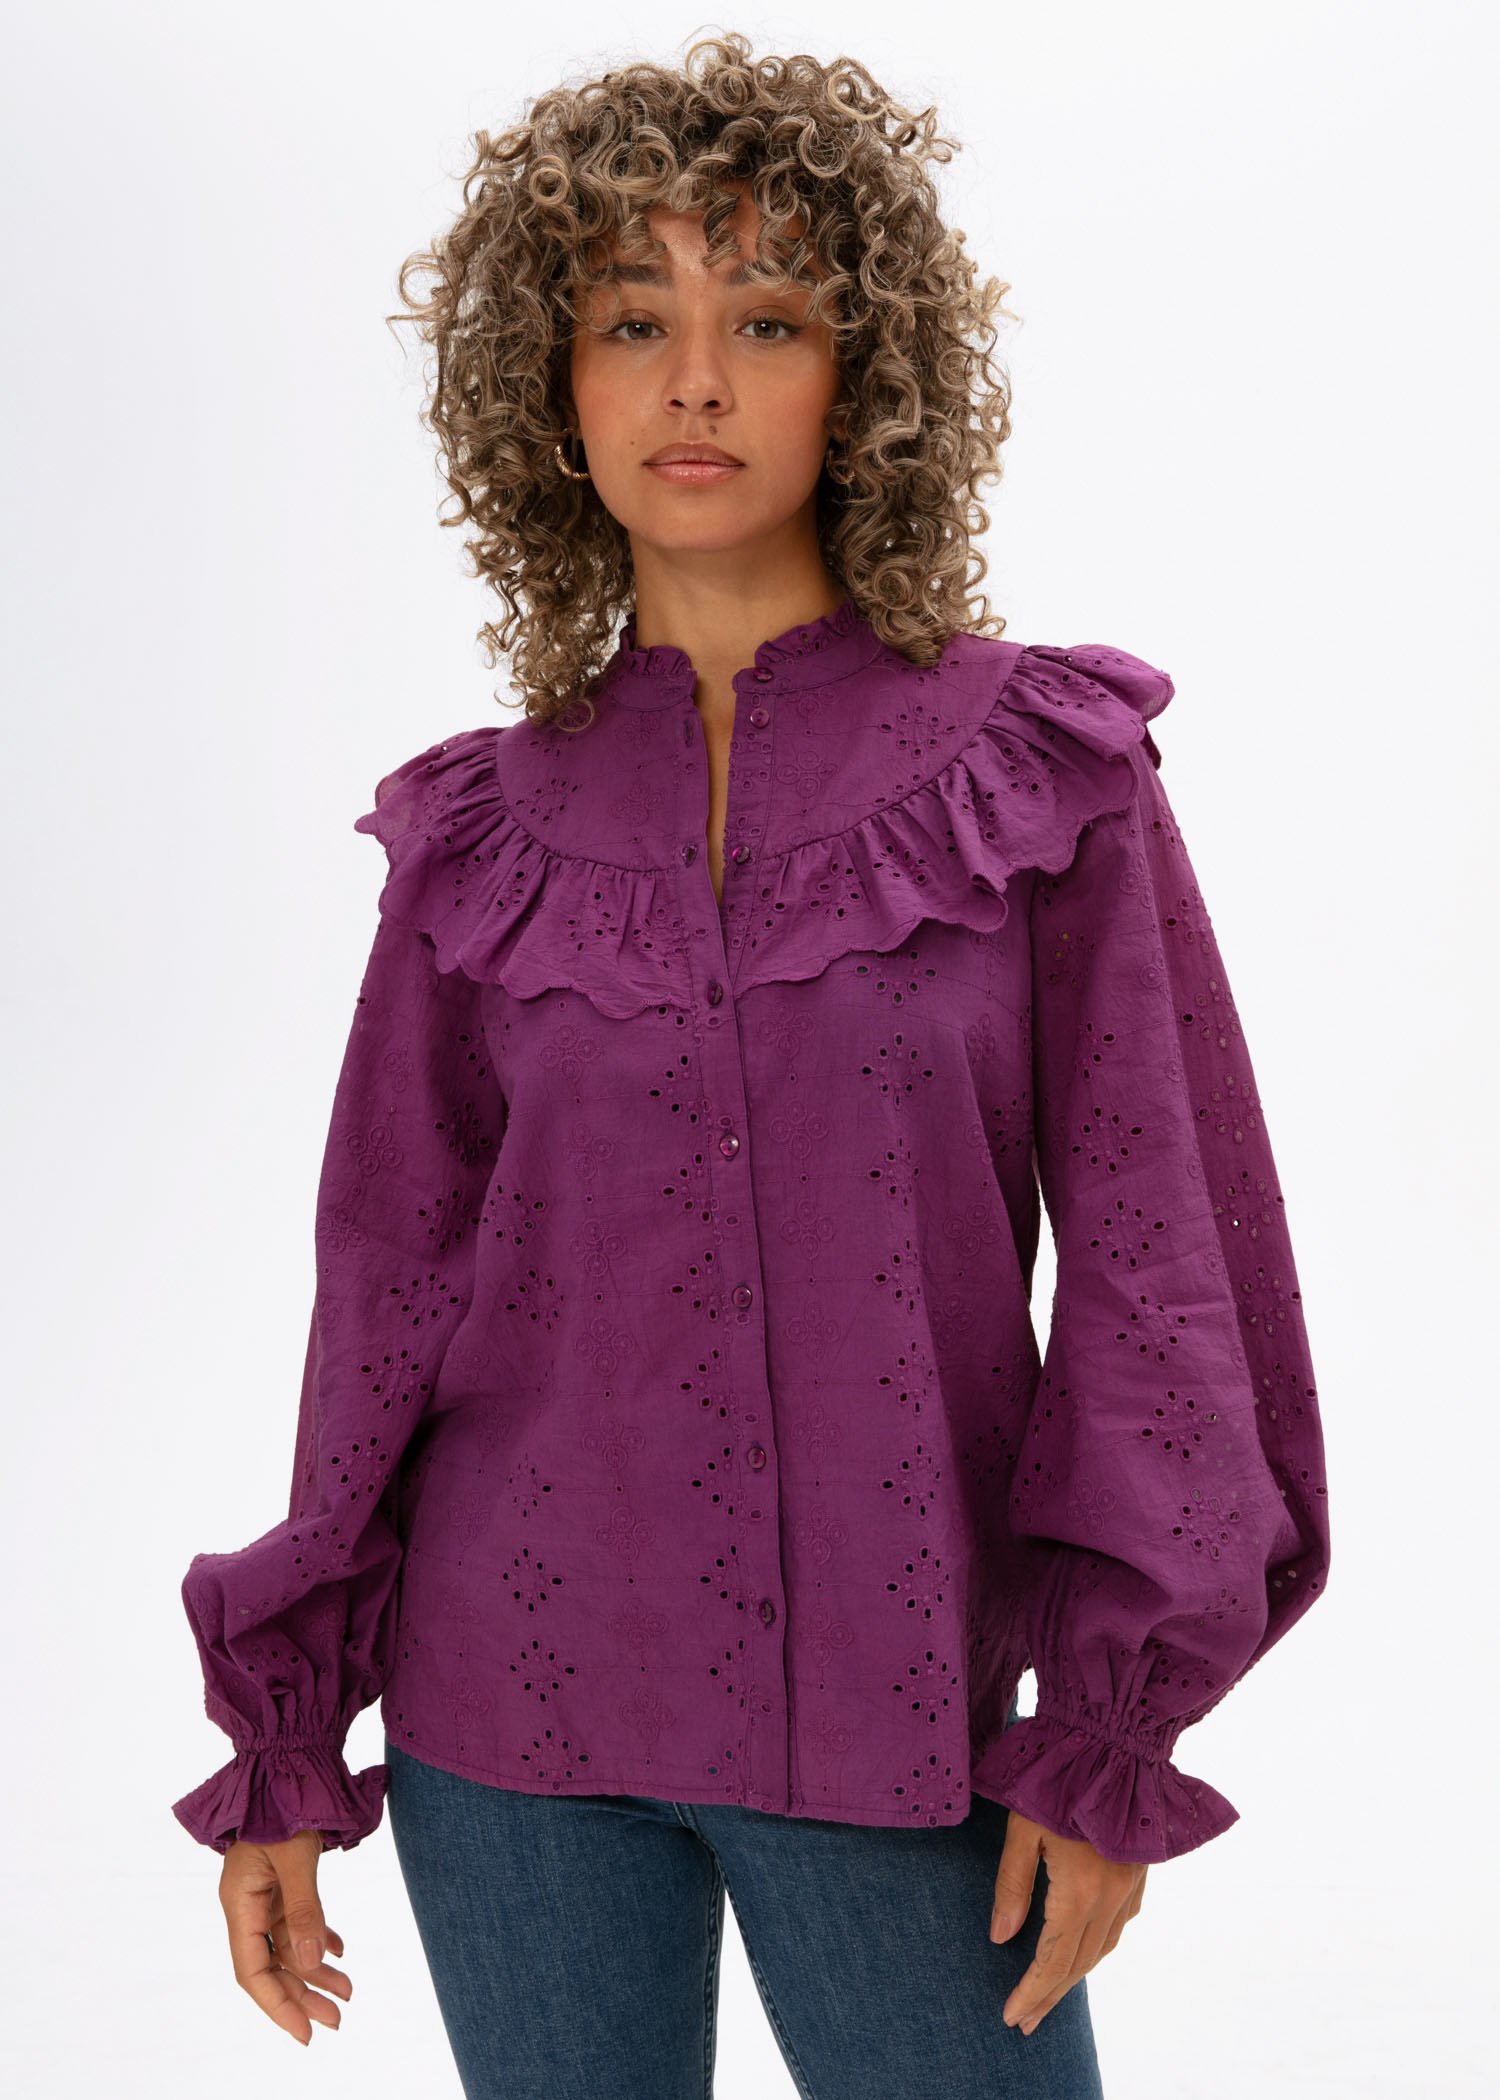 Broderie anglaise blouse Image 0